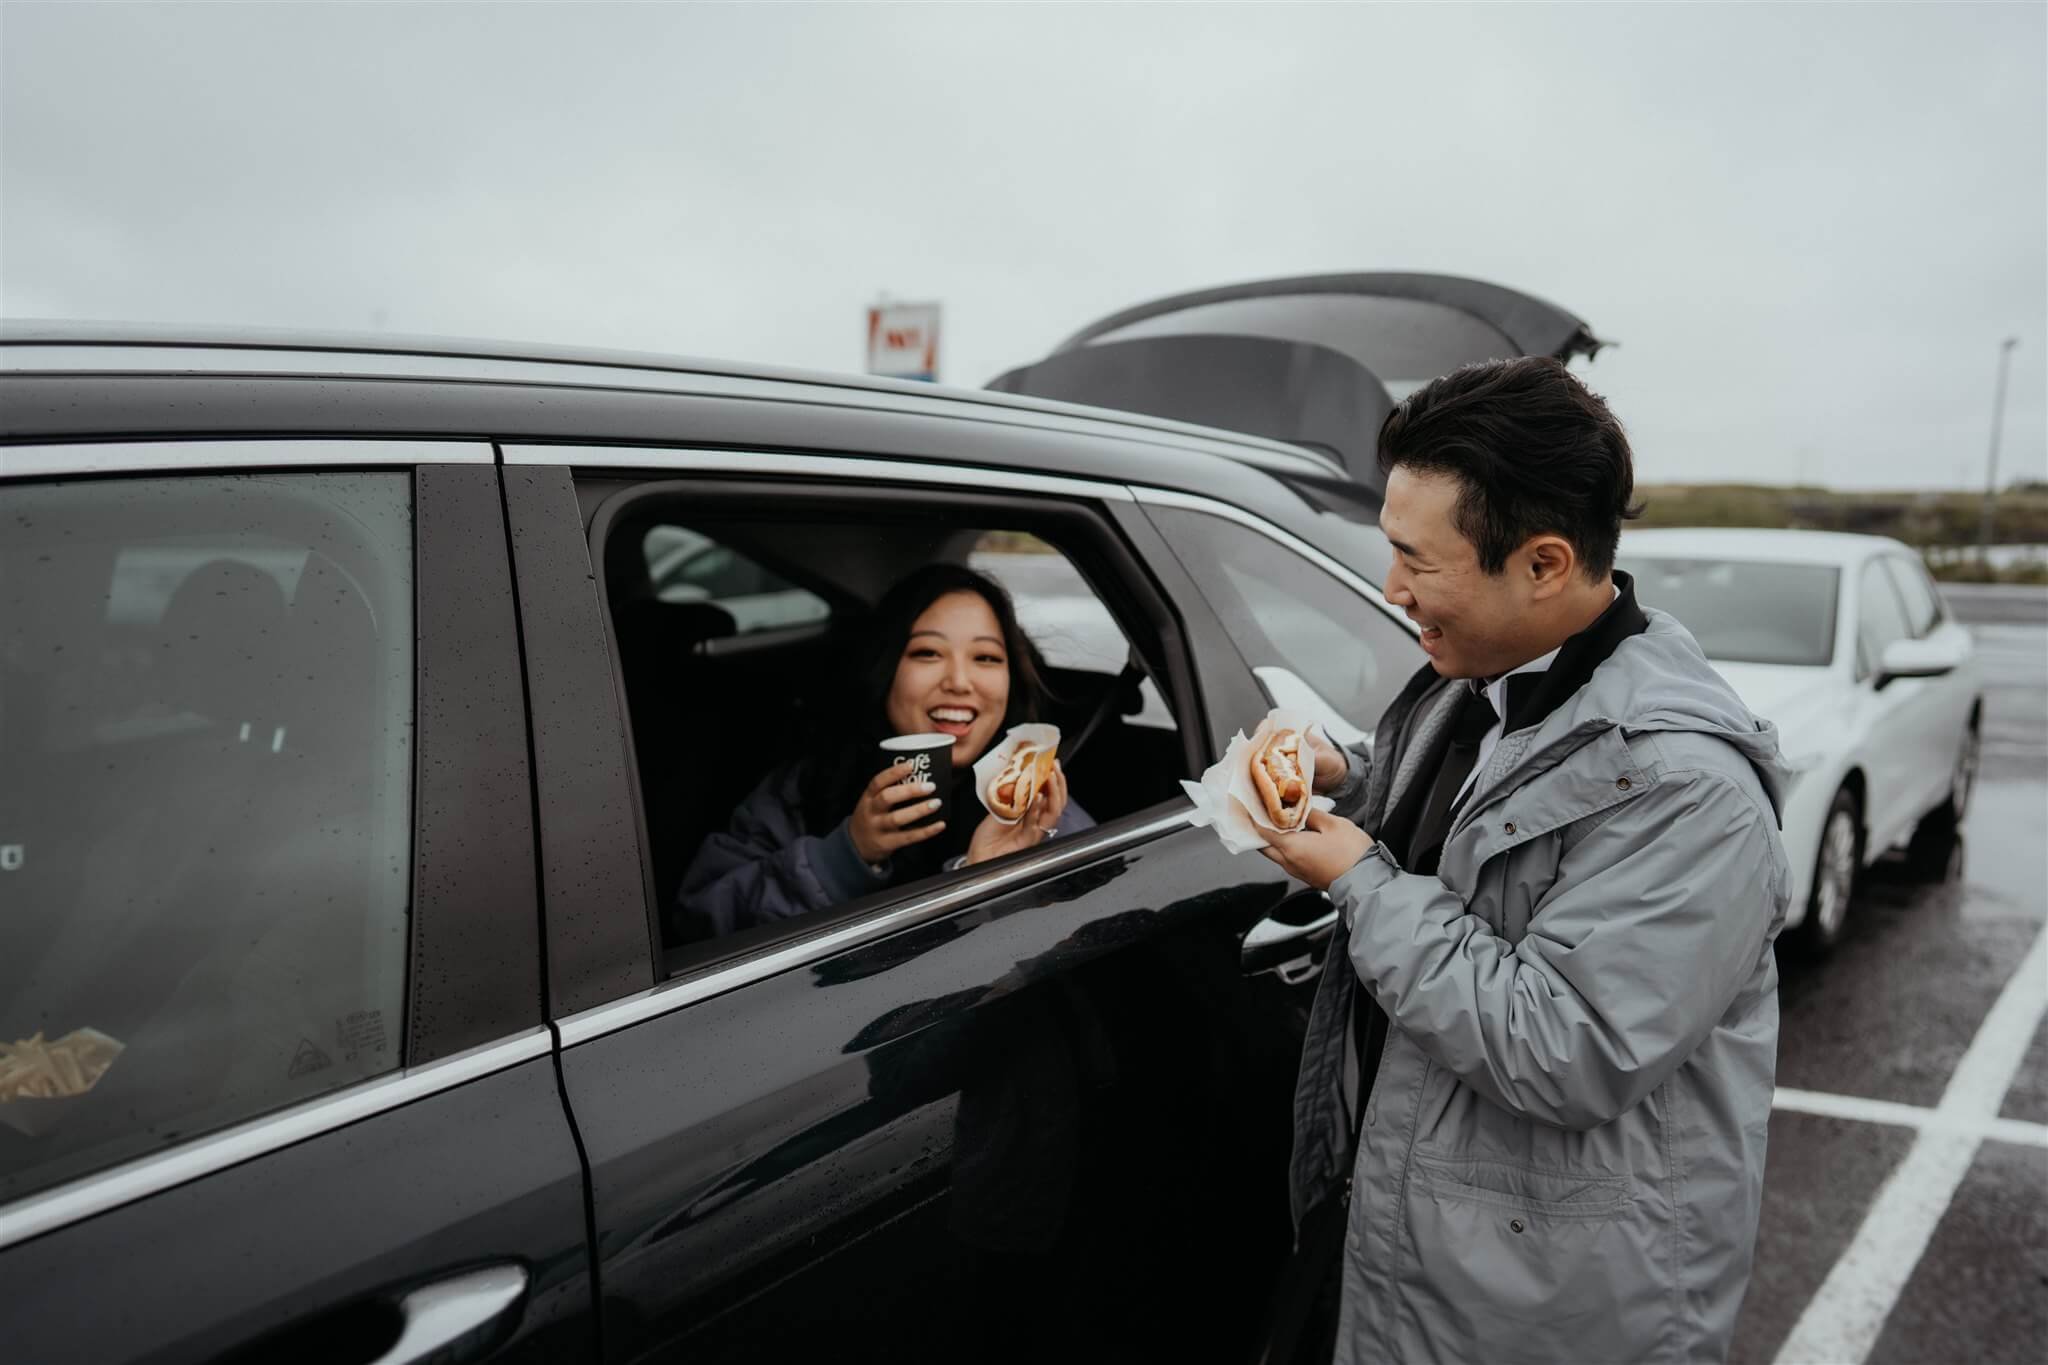 Bride and groom eating hot dogs in the car before eloping in Iceland